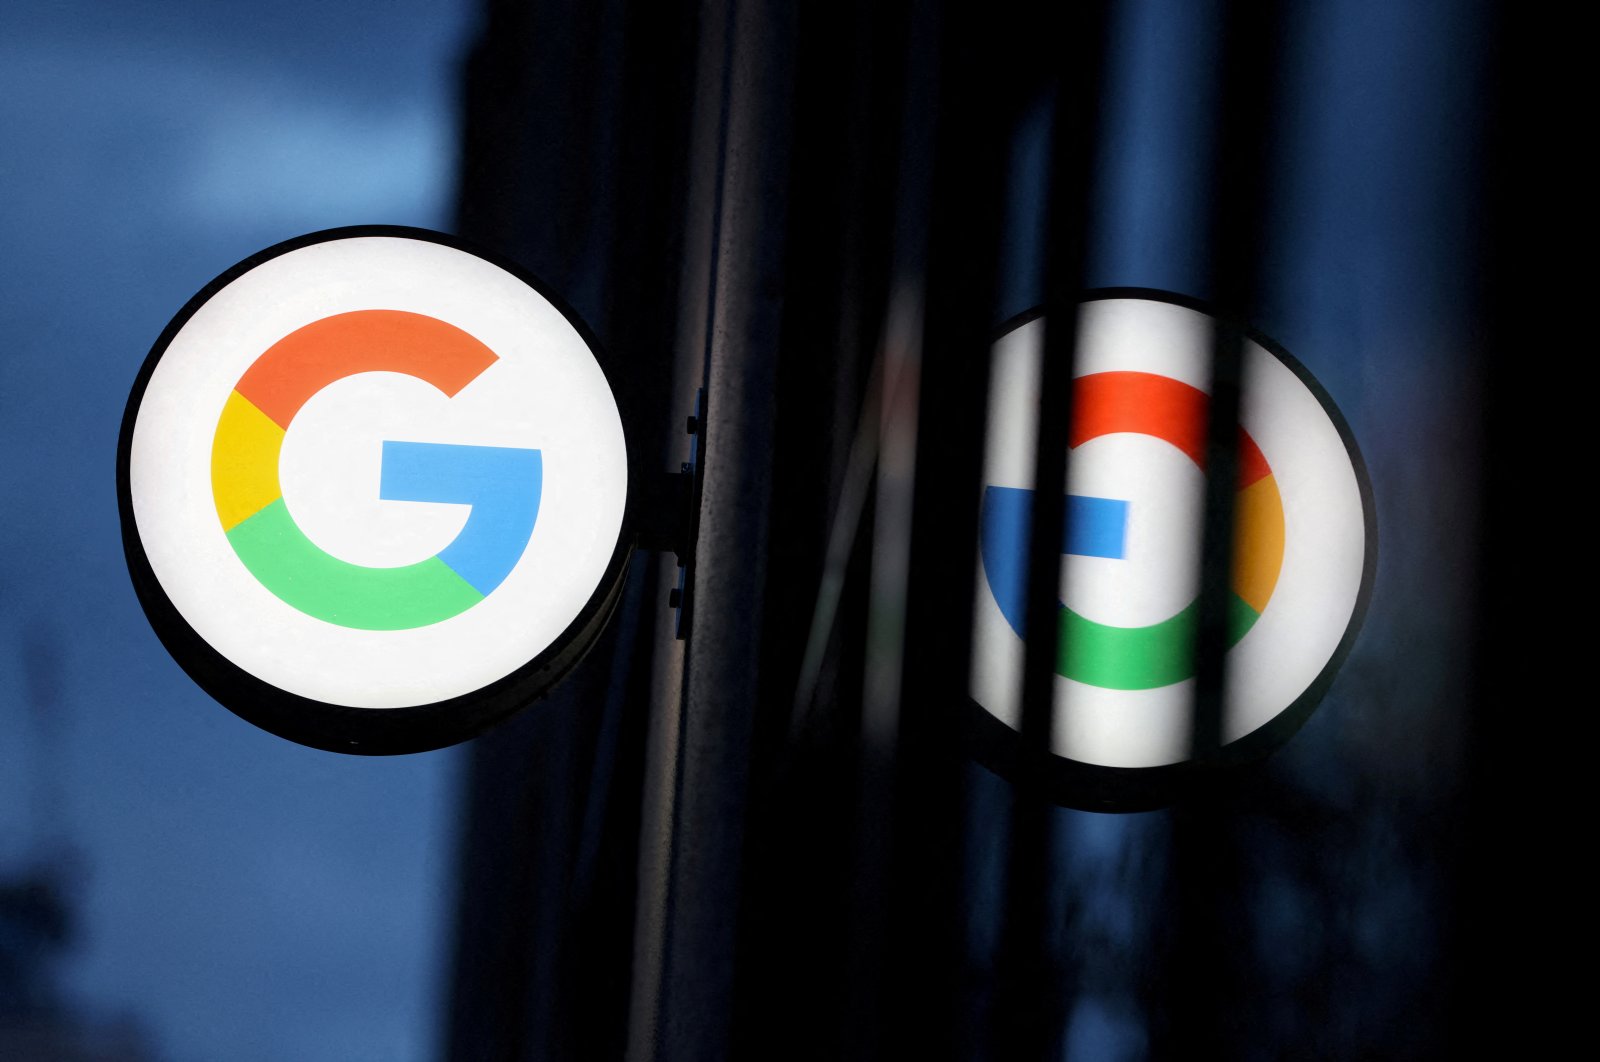 The logo for Google LLC is seen at the Google Store Chelsea in Manhattan, New York City, U.S., Nov. 17, 2021. (Reuters Photo)